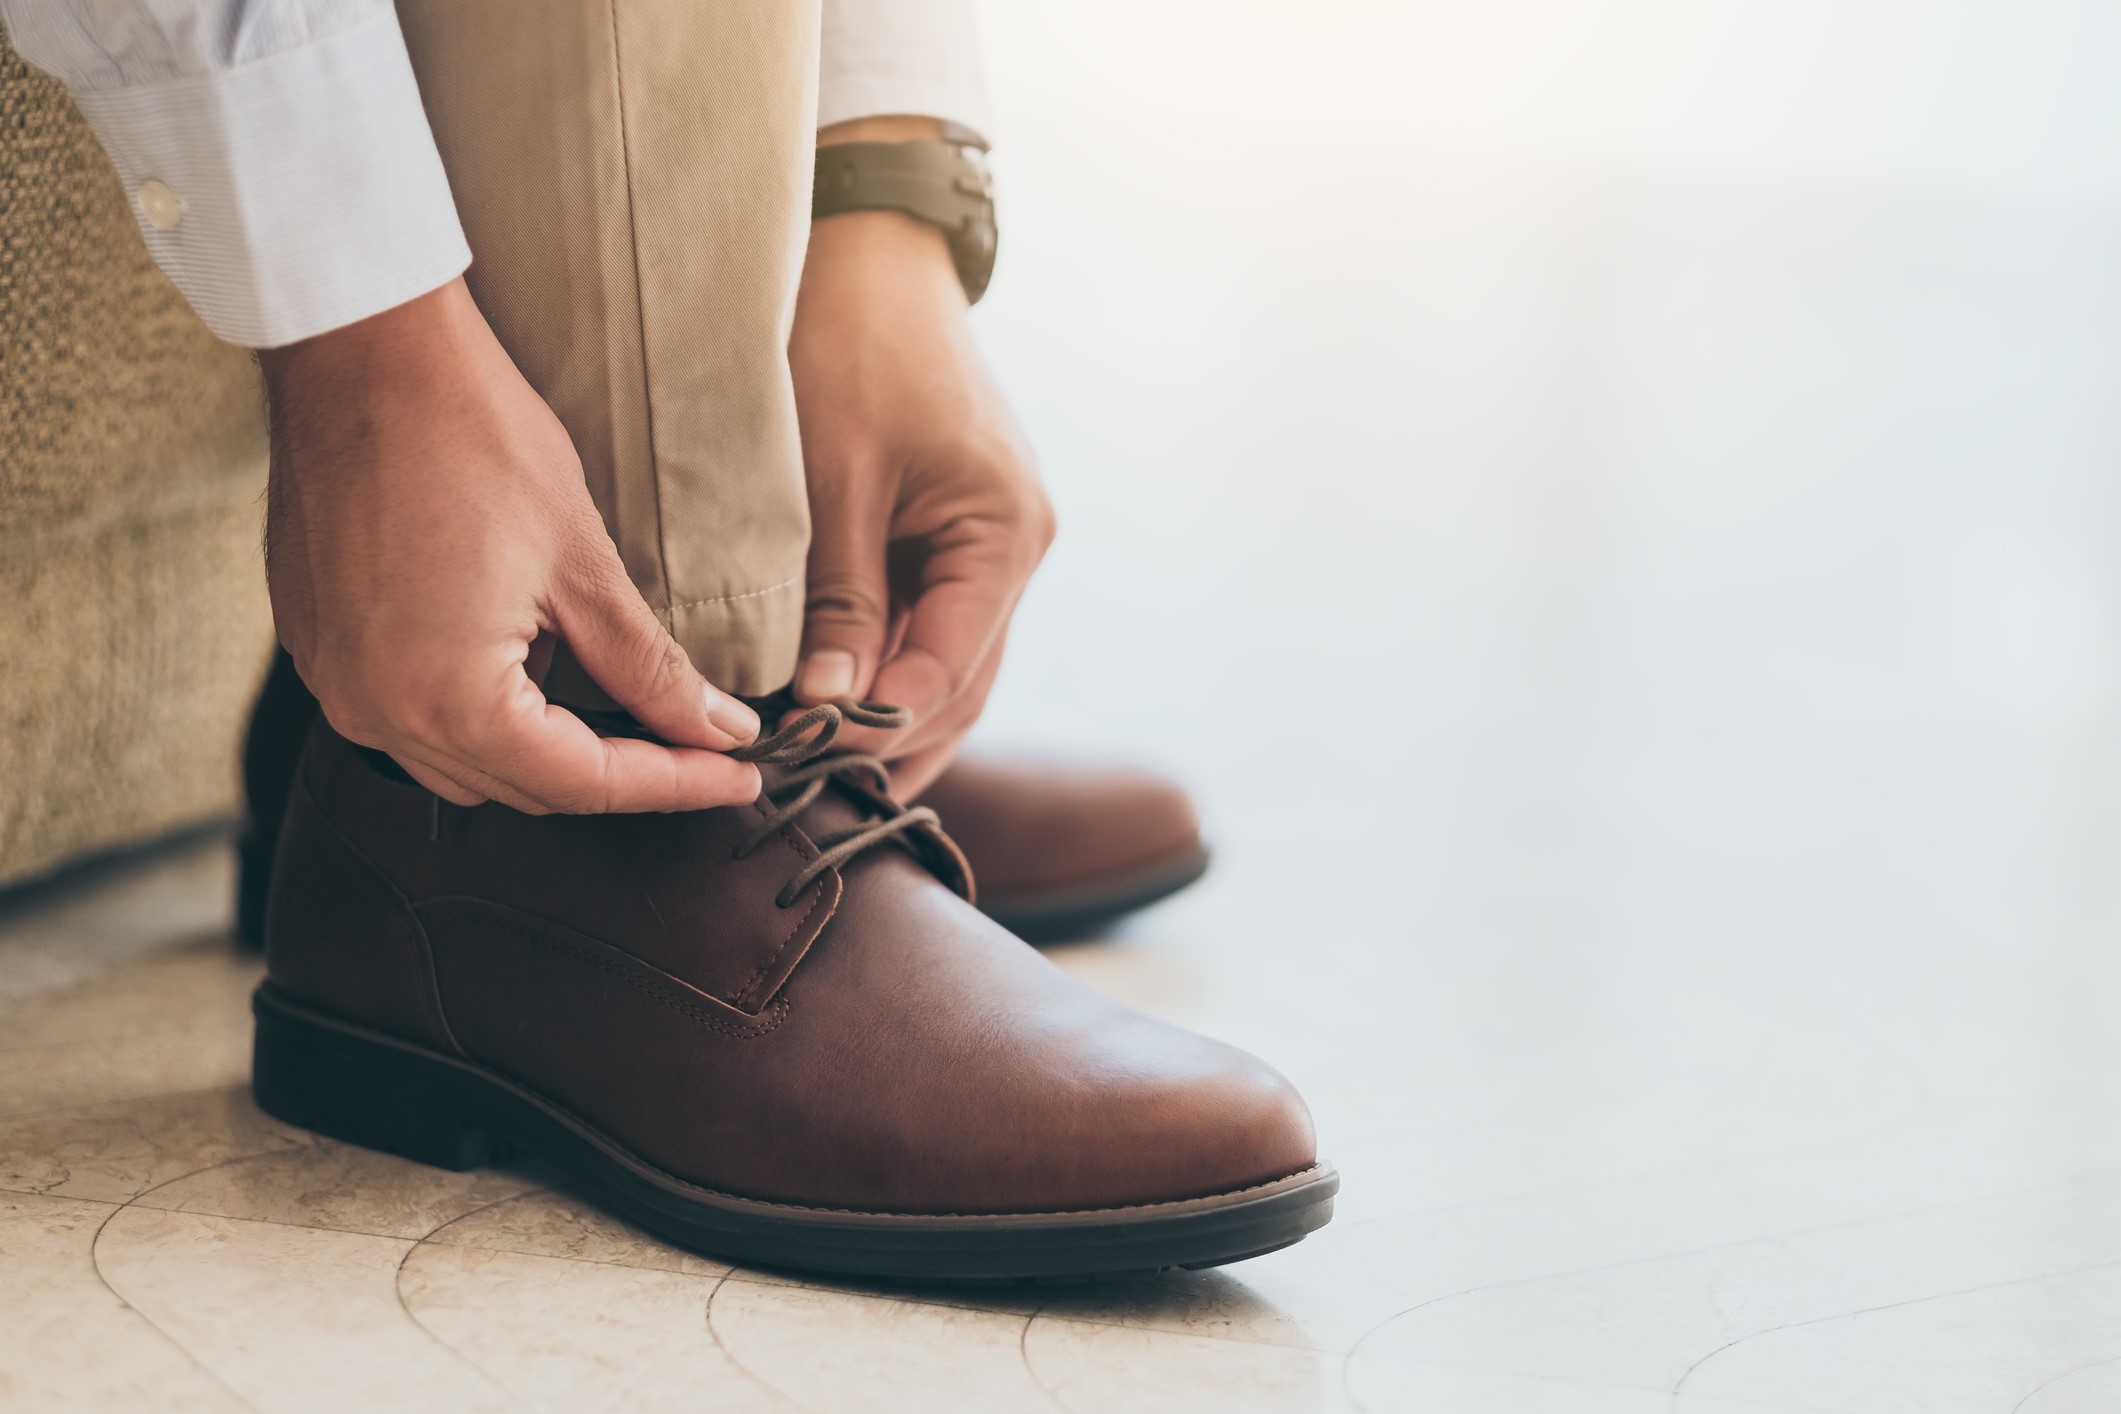 How To Wear Men's Boots: Styles and Outfits for 2022 - The Manual